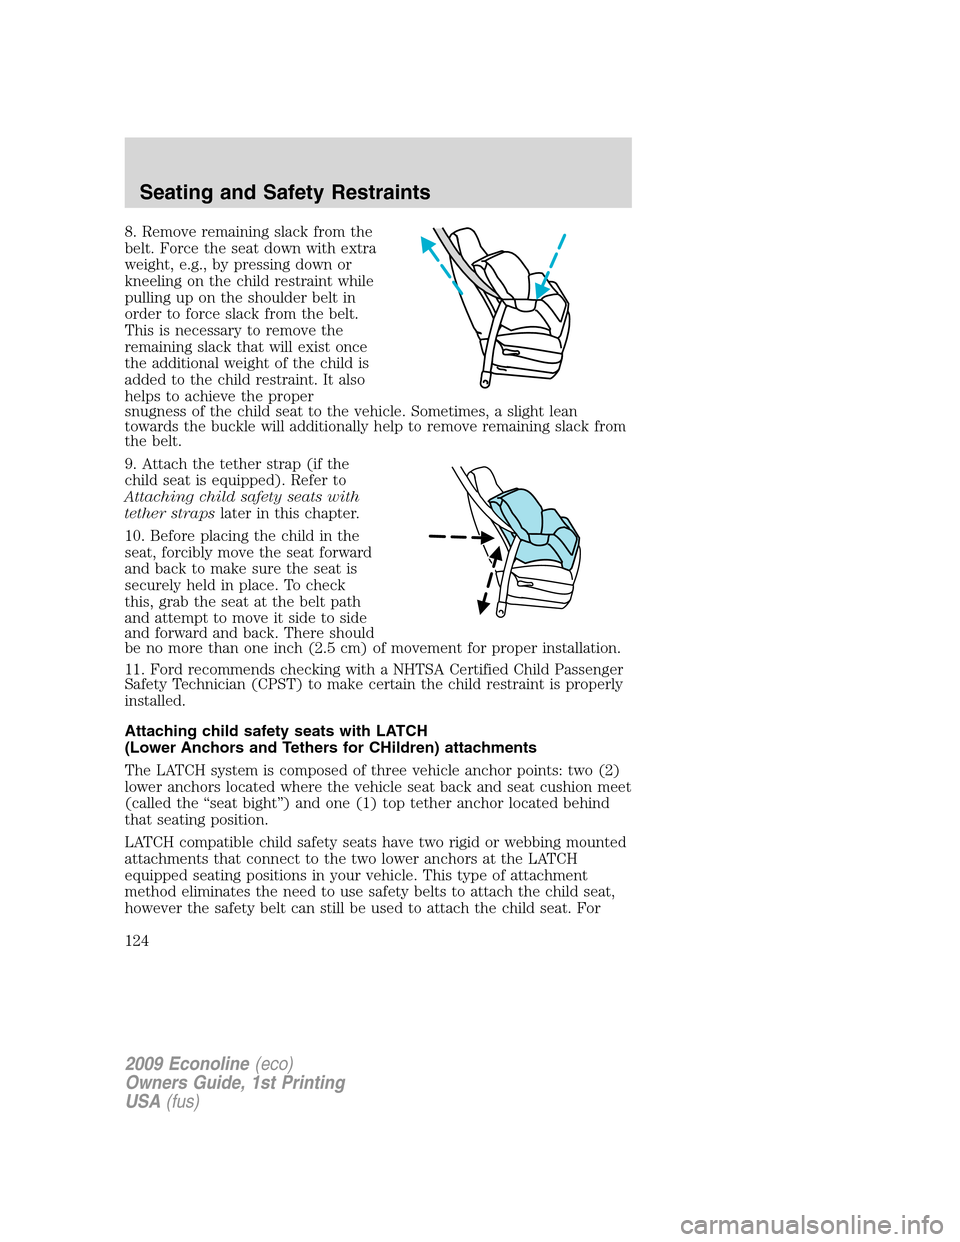 FORD E SERIES 2009 4.G Owners Manual 8. Remove remaining slack from the
belt. Force the seat down with extra
weight, e.g., by pressing down or
kneeling on the child restraint while
pulling up on the shoulder belt in
order to force slack 